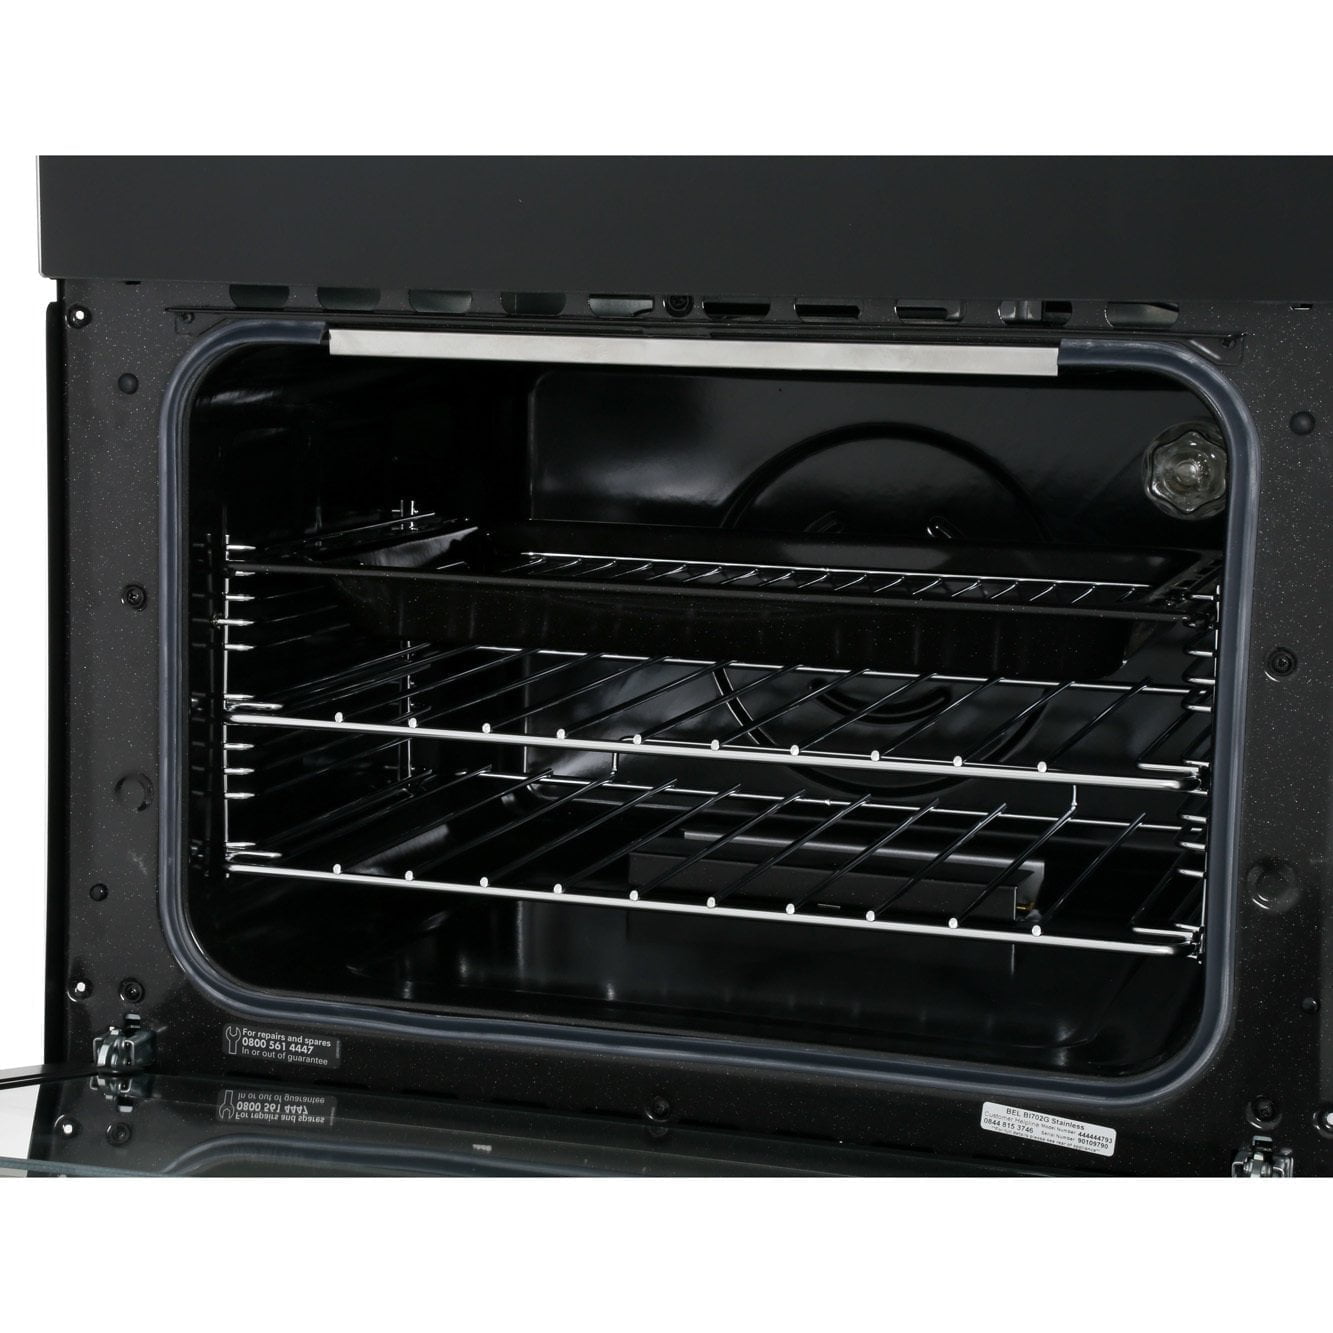 Belling BI702G Built Under Gas Double Oven with Full Width Electric Grill - Stainless Steel